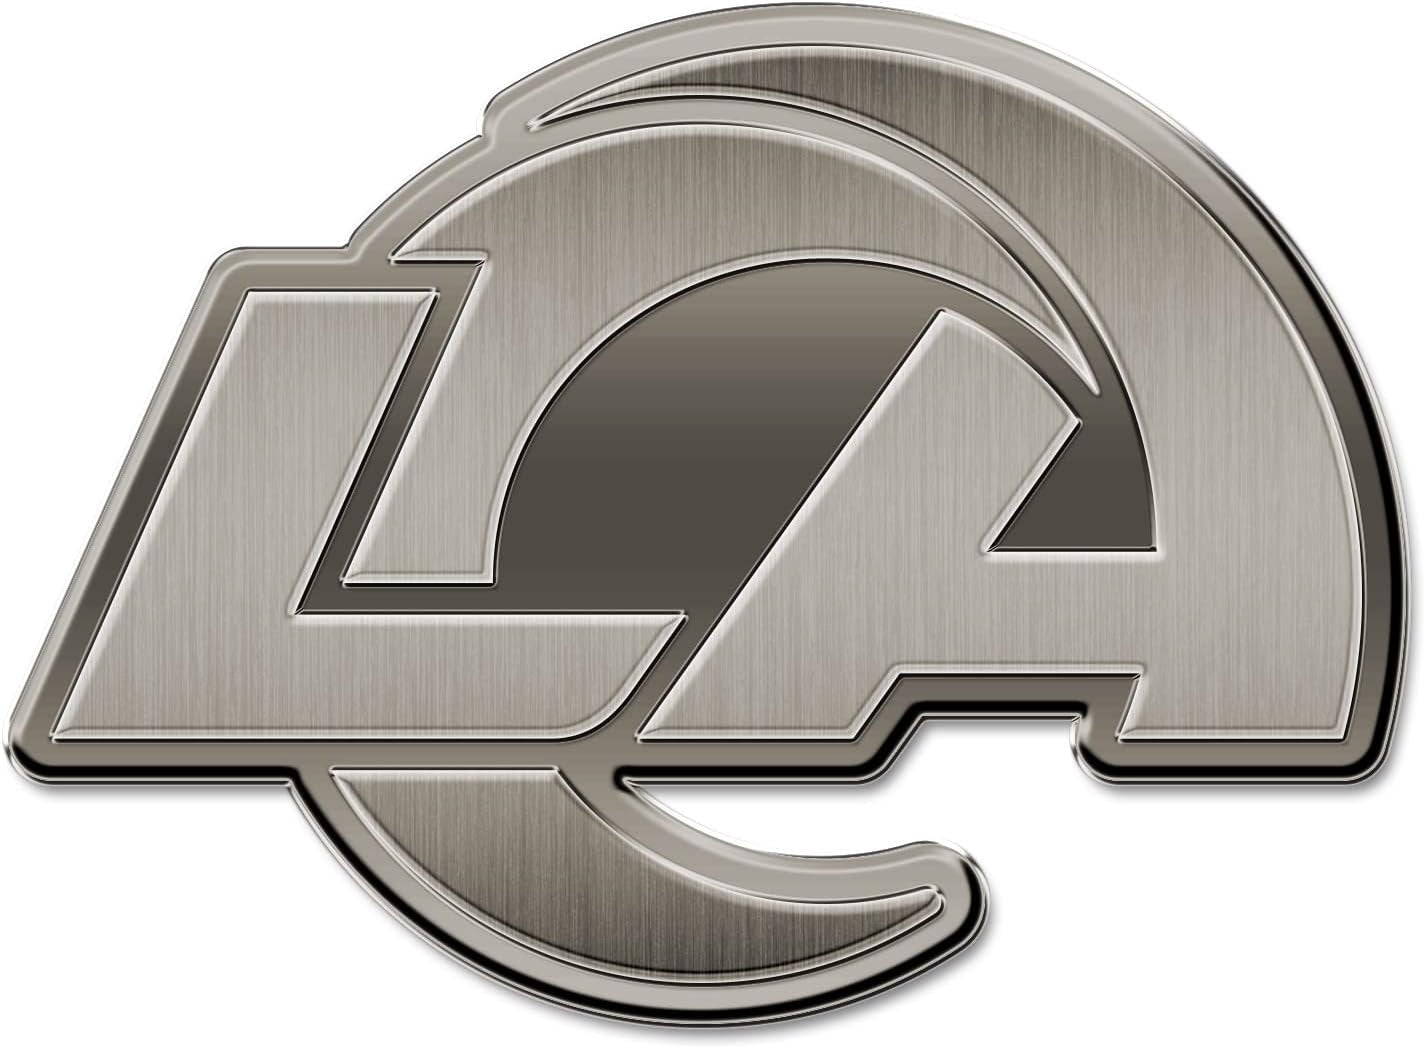 Los Angeles Rams Solid Metal Auto Emblem Antique Nickel Finish for Car/Truck/SUV